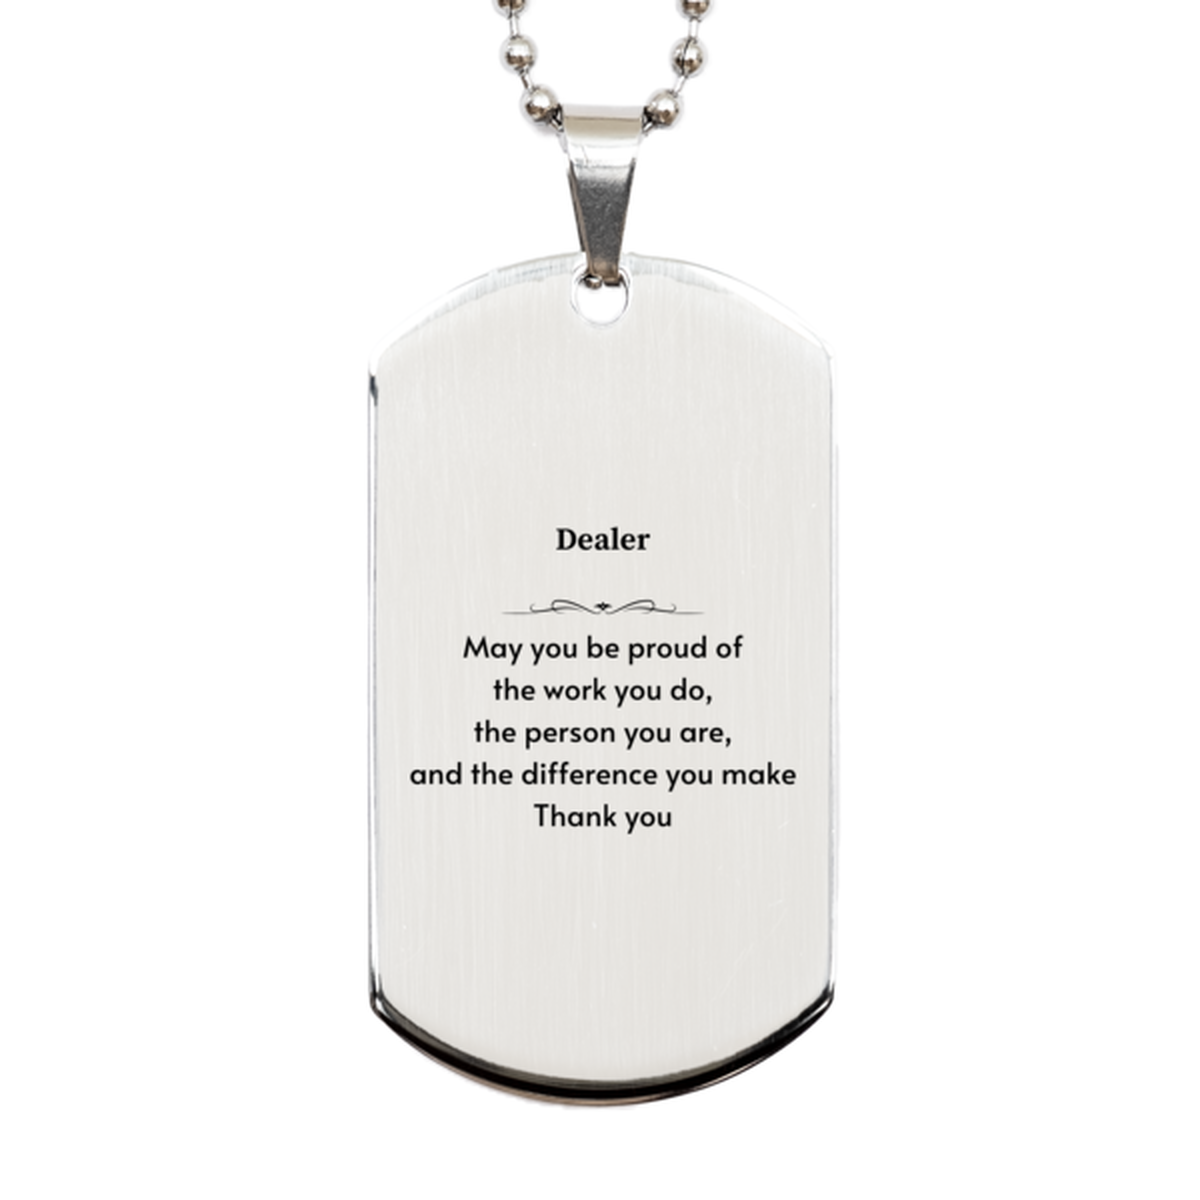 Heartwarming Silver Dog Tag Retirement Coworkers Gifts for Dealer, Dealer May You be proud of the work you do, the person you are Gifts for Boss Men Women Friends